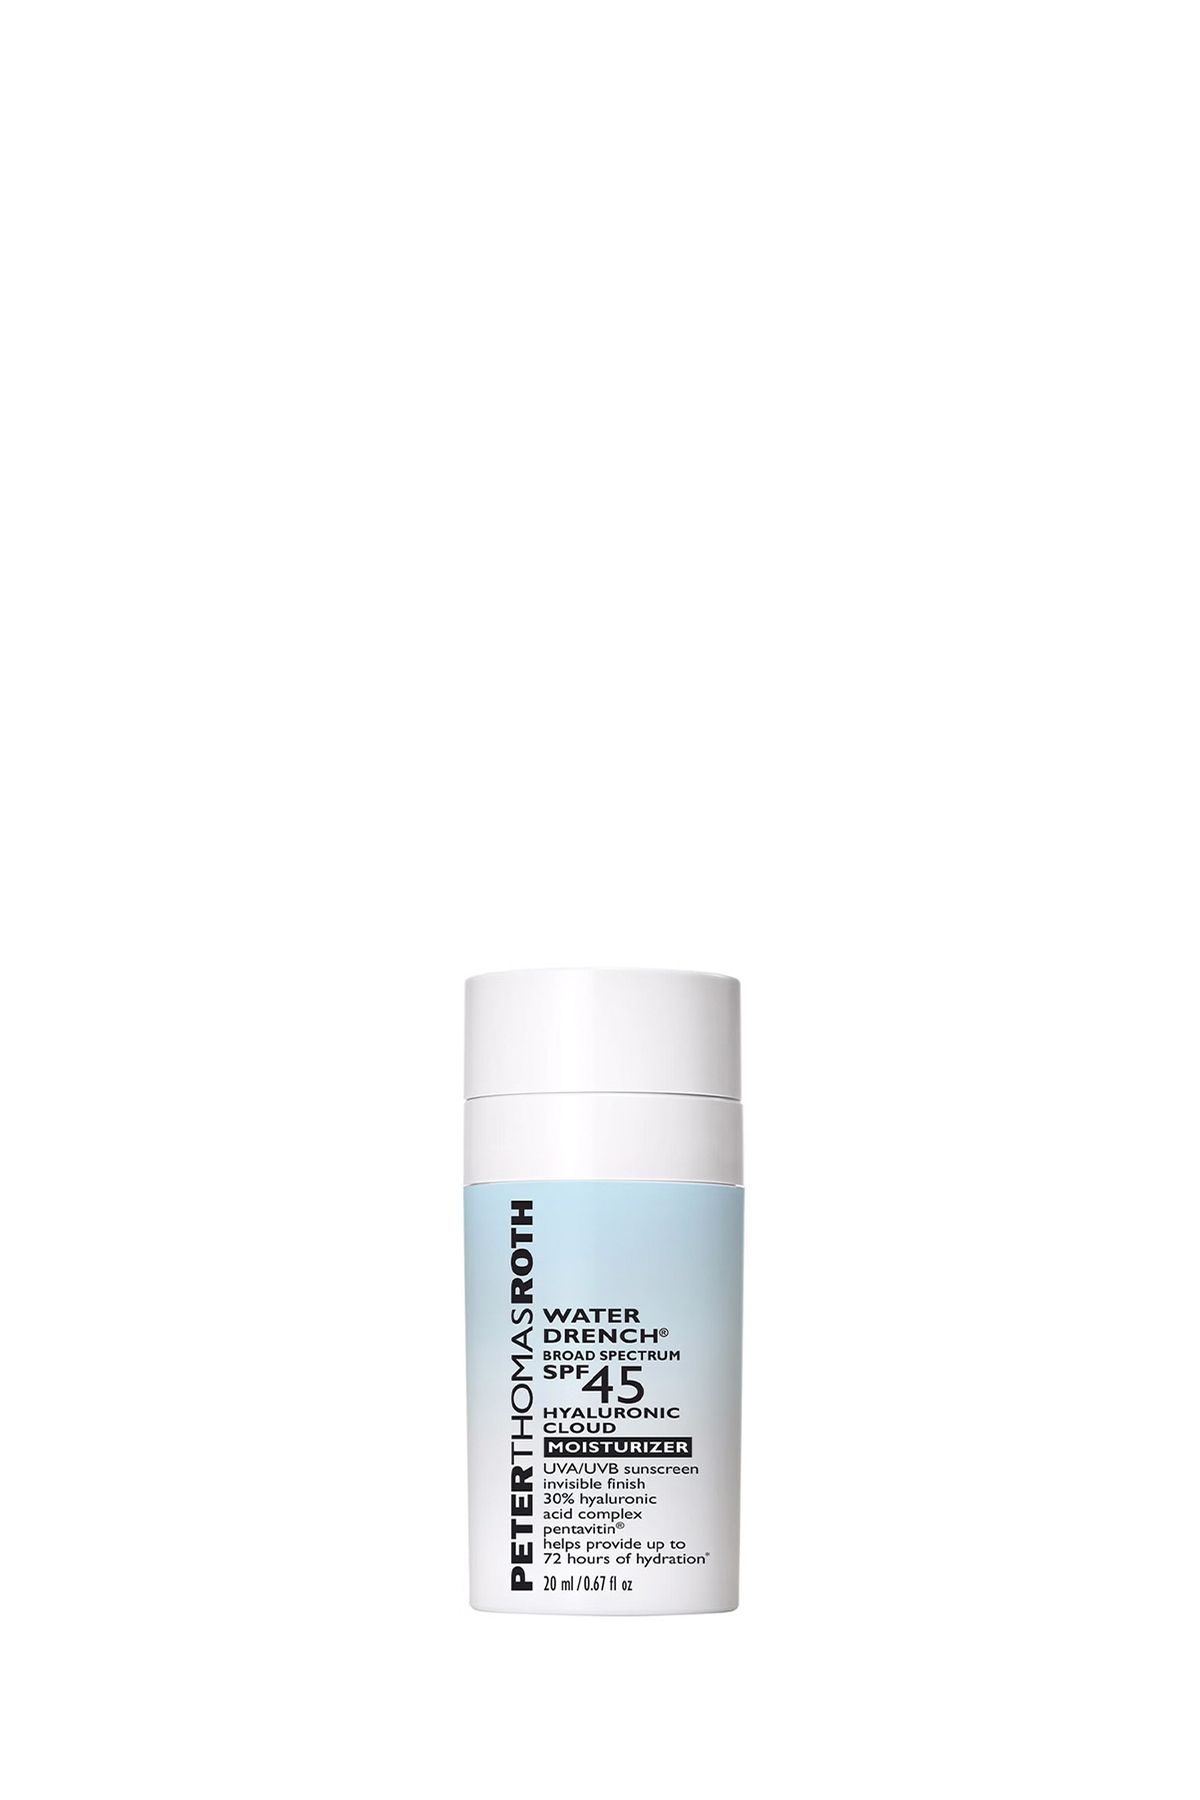 PETER THOMAS ROTH Water Drench Broad Spectrum SPF 45 Hyaluronic Cloud Moisturizer 20 ml